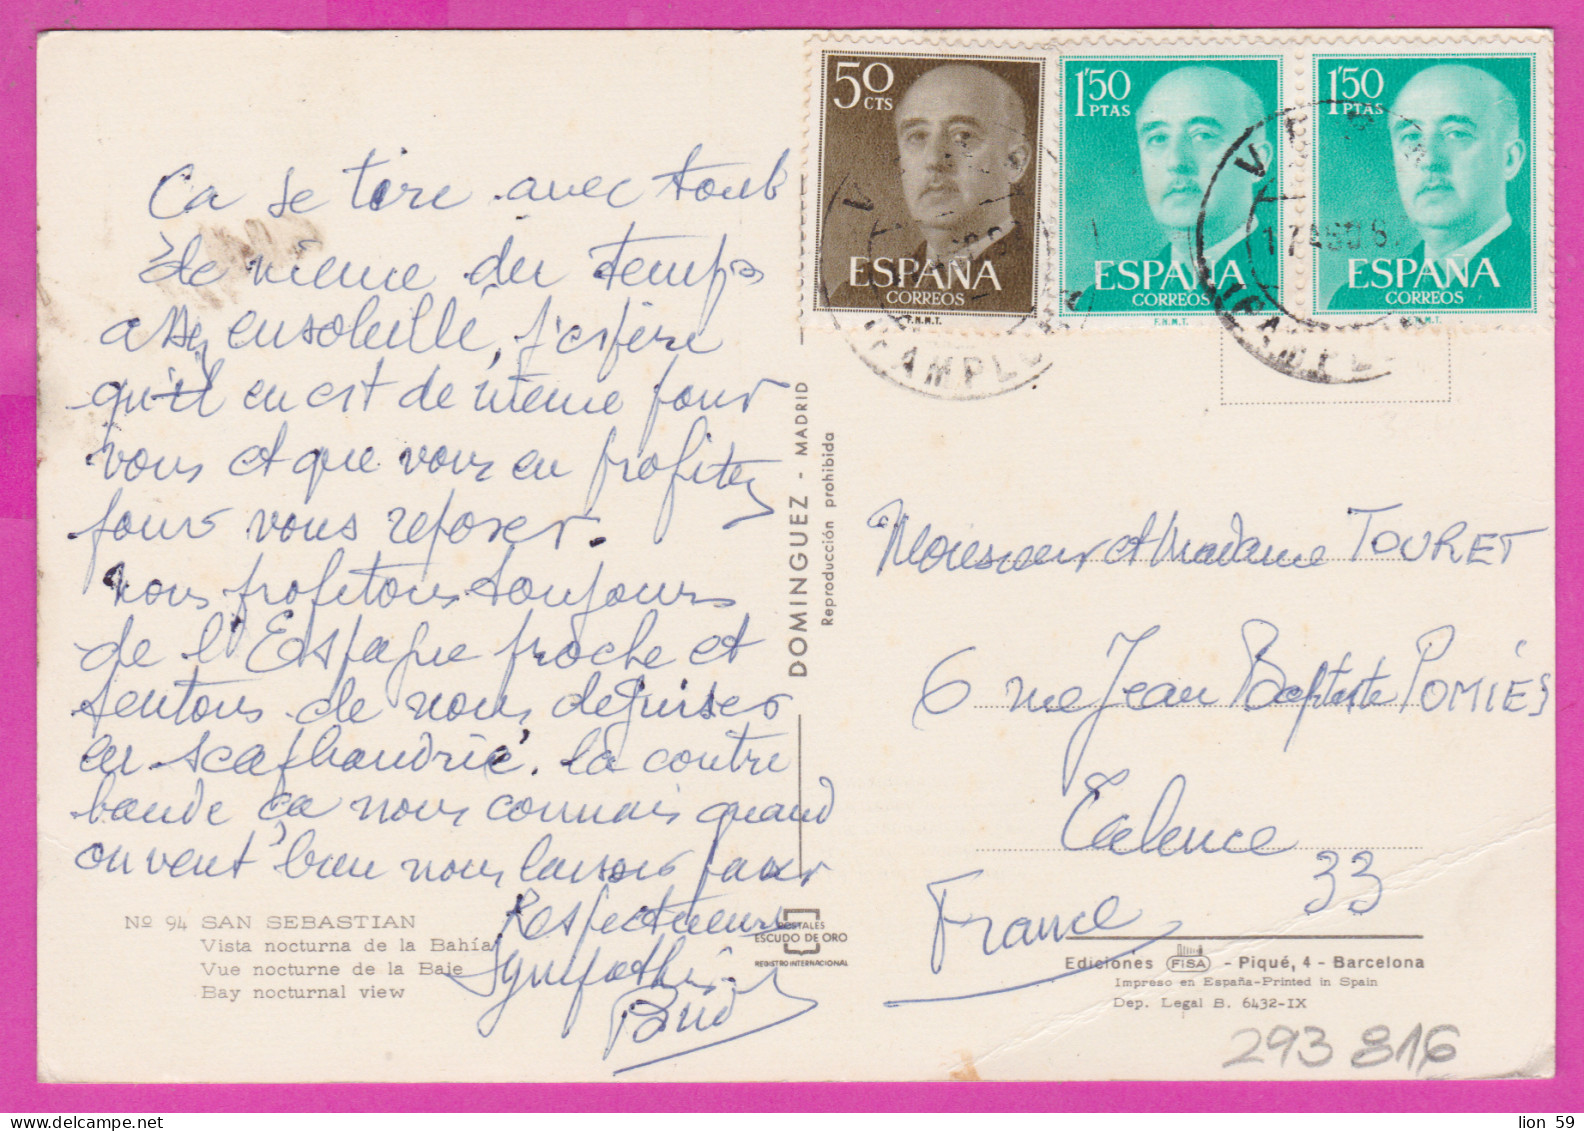 293816 / Spain - San Sebastian - Bay Nochurnal View  PC 1961 USED 50 Cts +1.50+1.50 Ptas General Francisco Franco - Covers & Documents